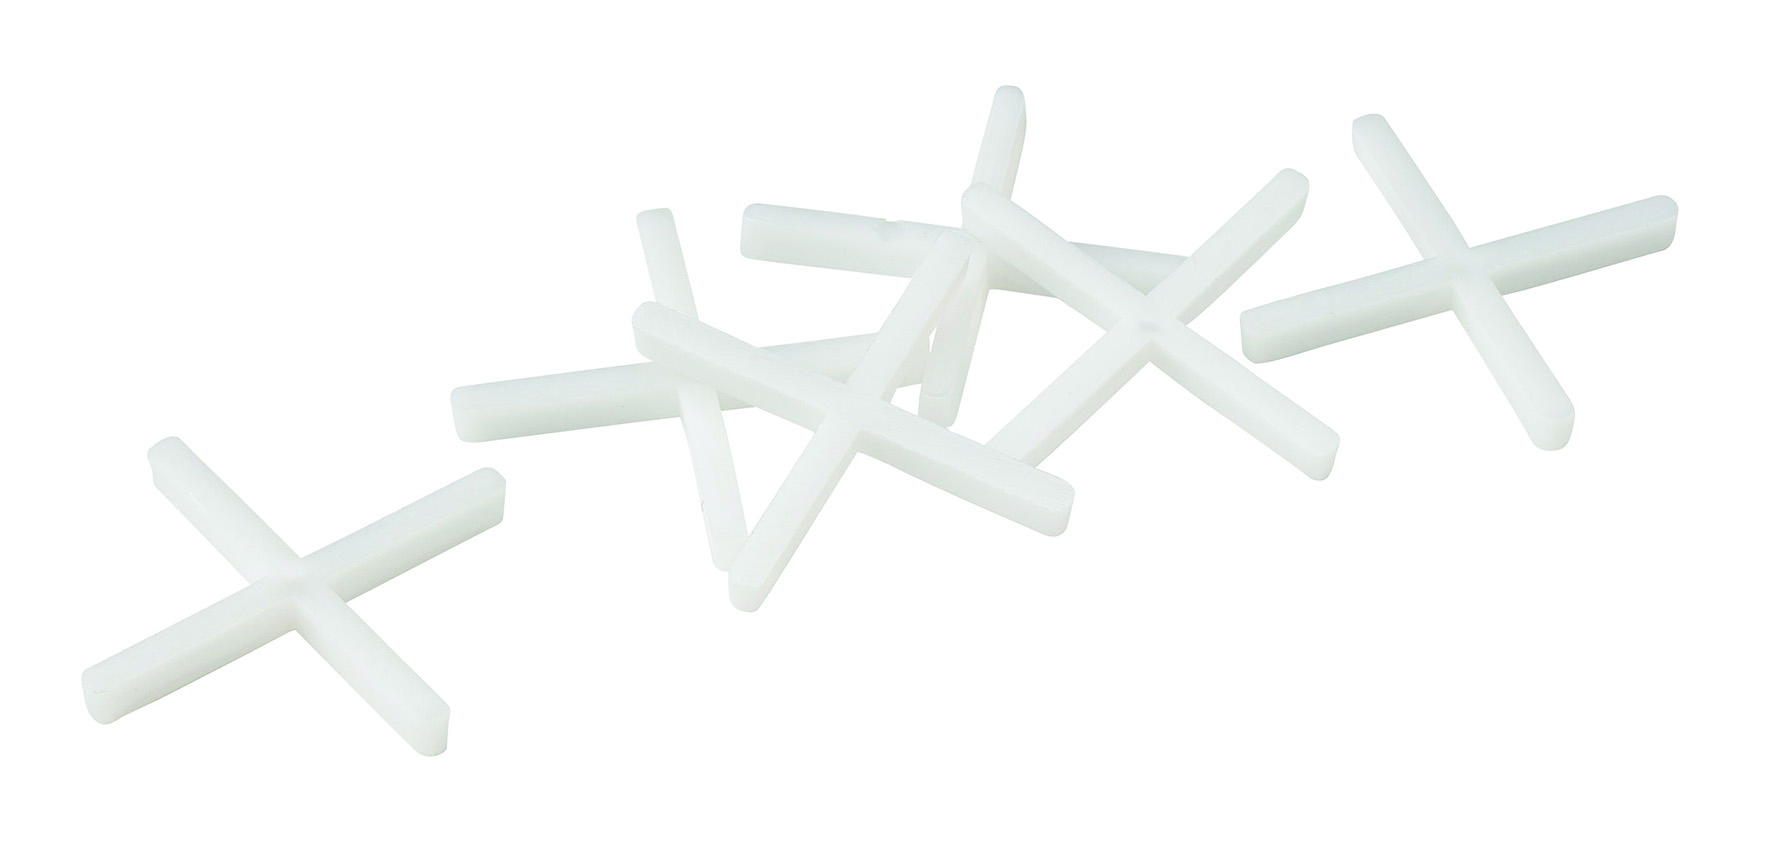 OX Trade Cross Shaped Tile Spacers - 4mm (250 pcs)